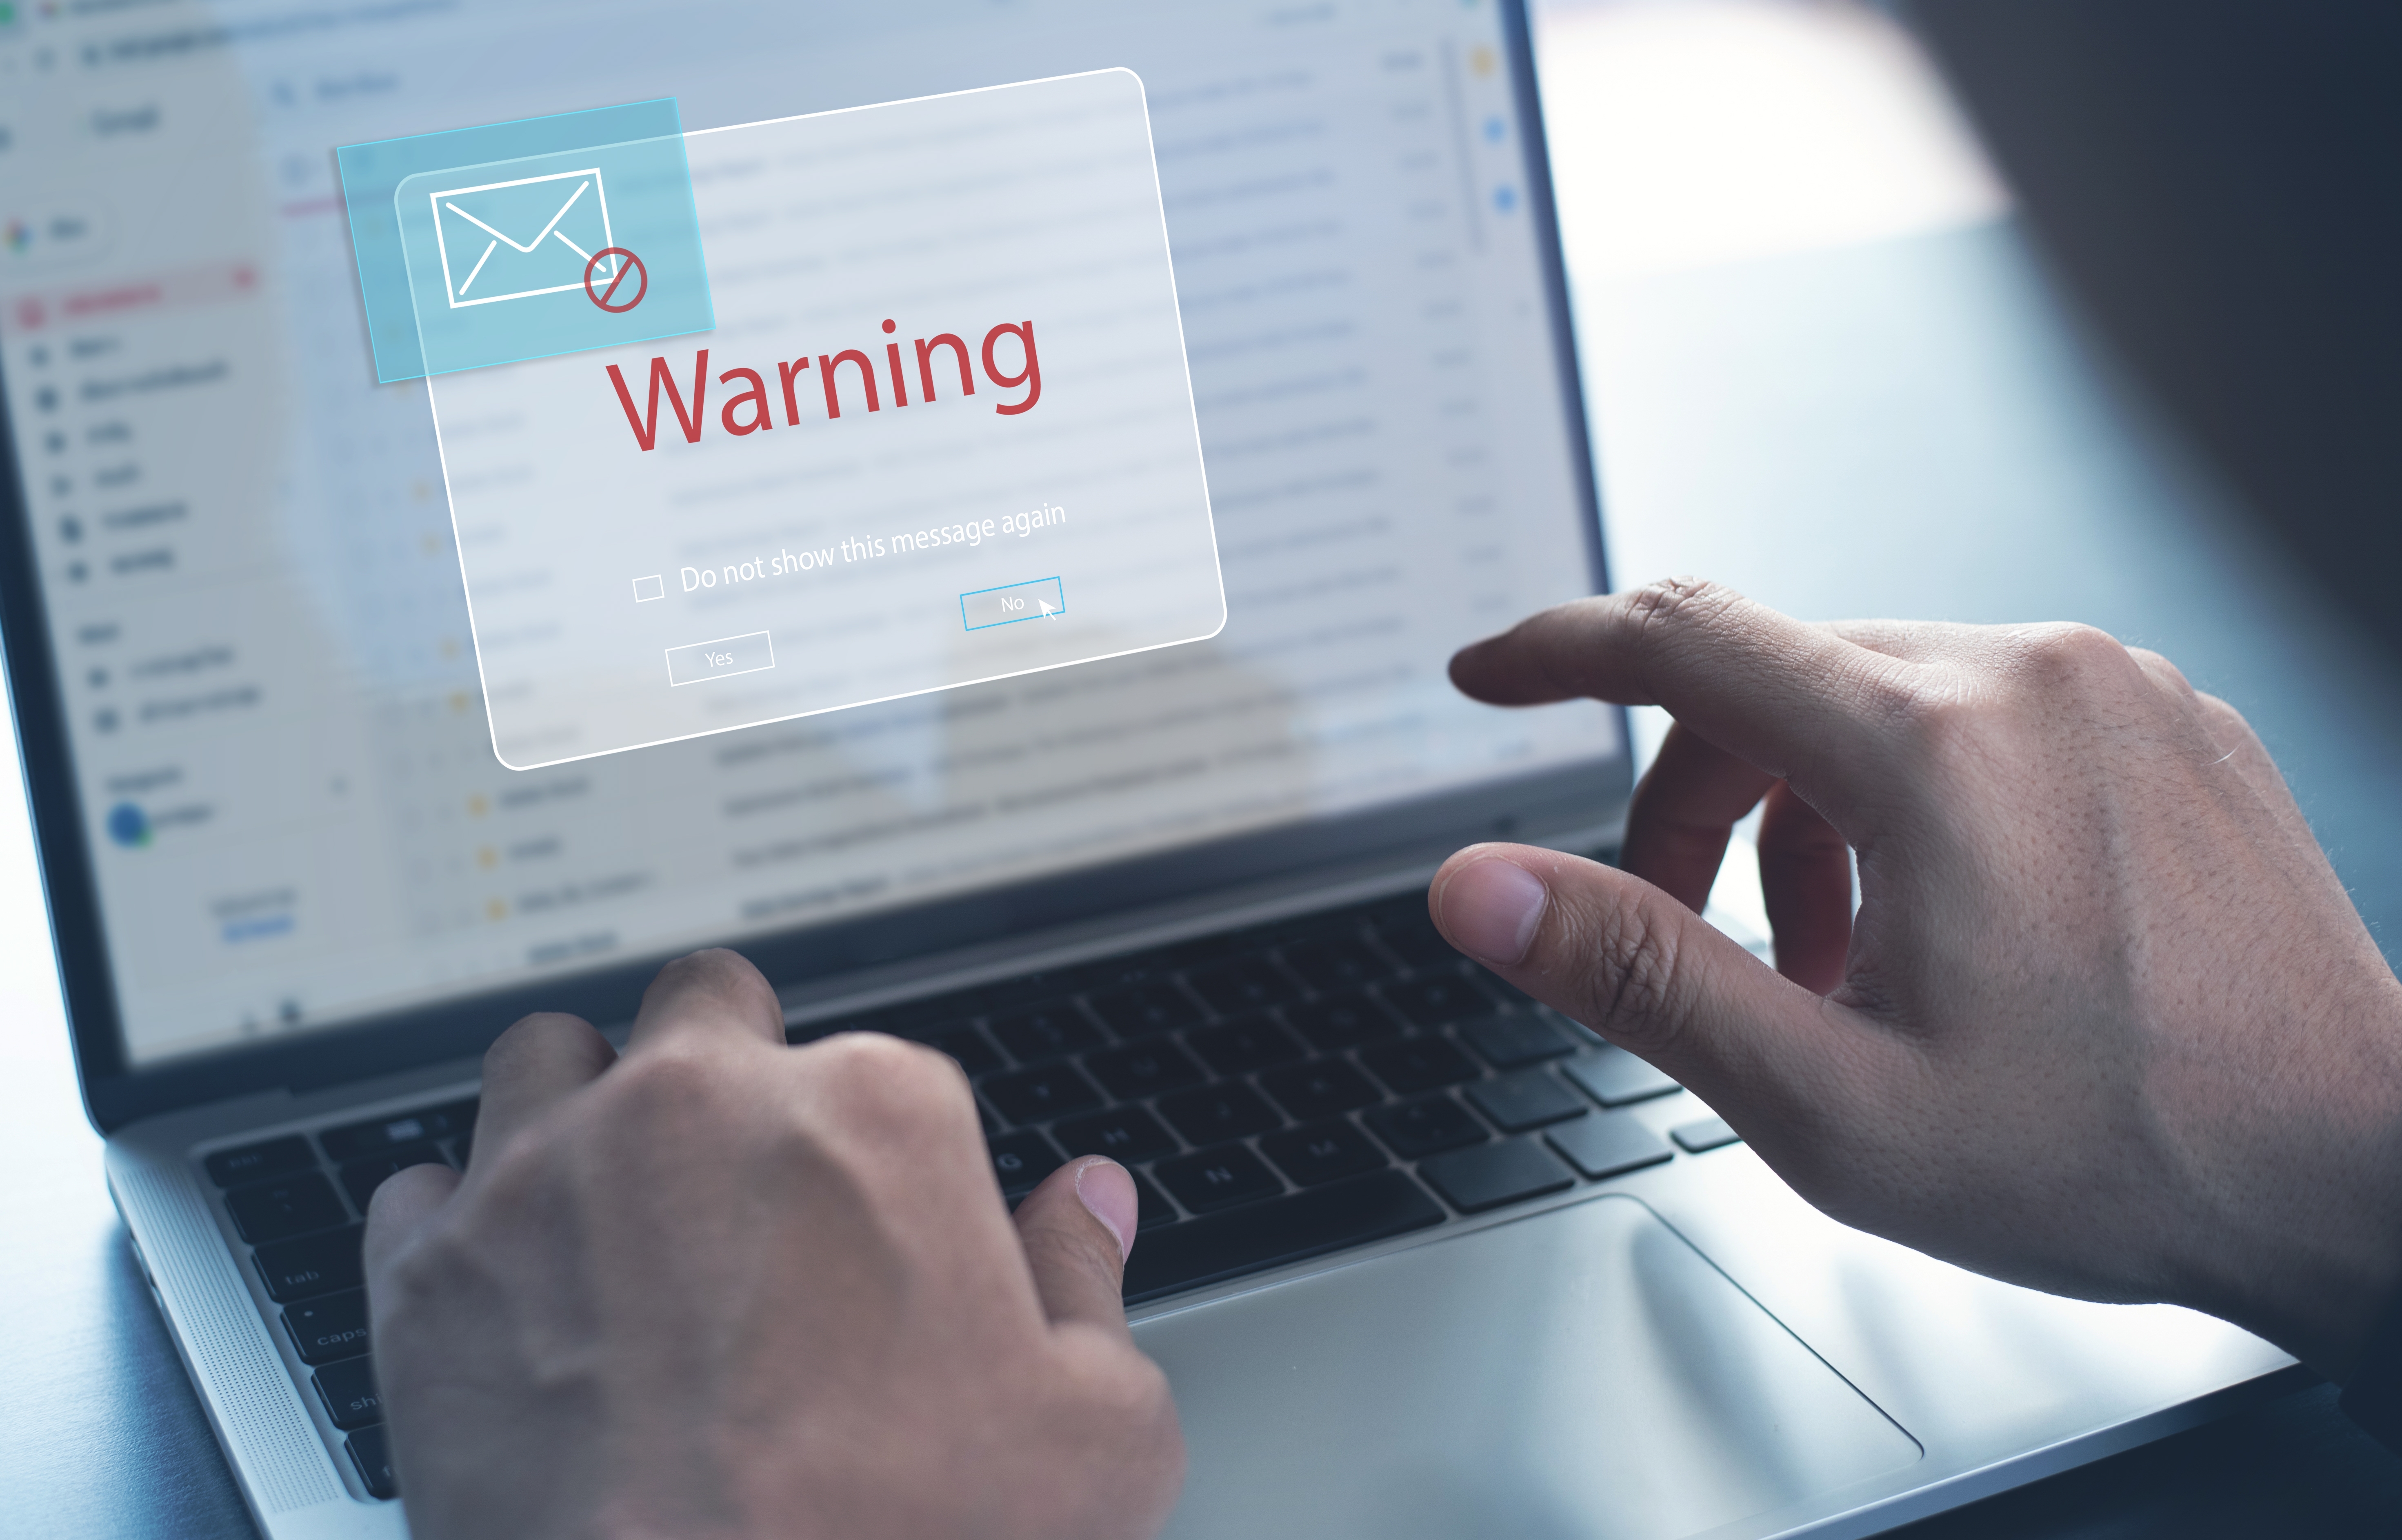 Guarding Against the Hook: How to Spot and Avoid Phishing Scams Online